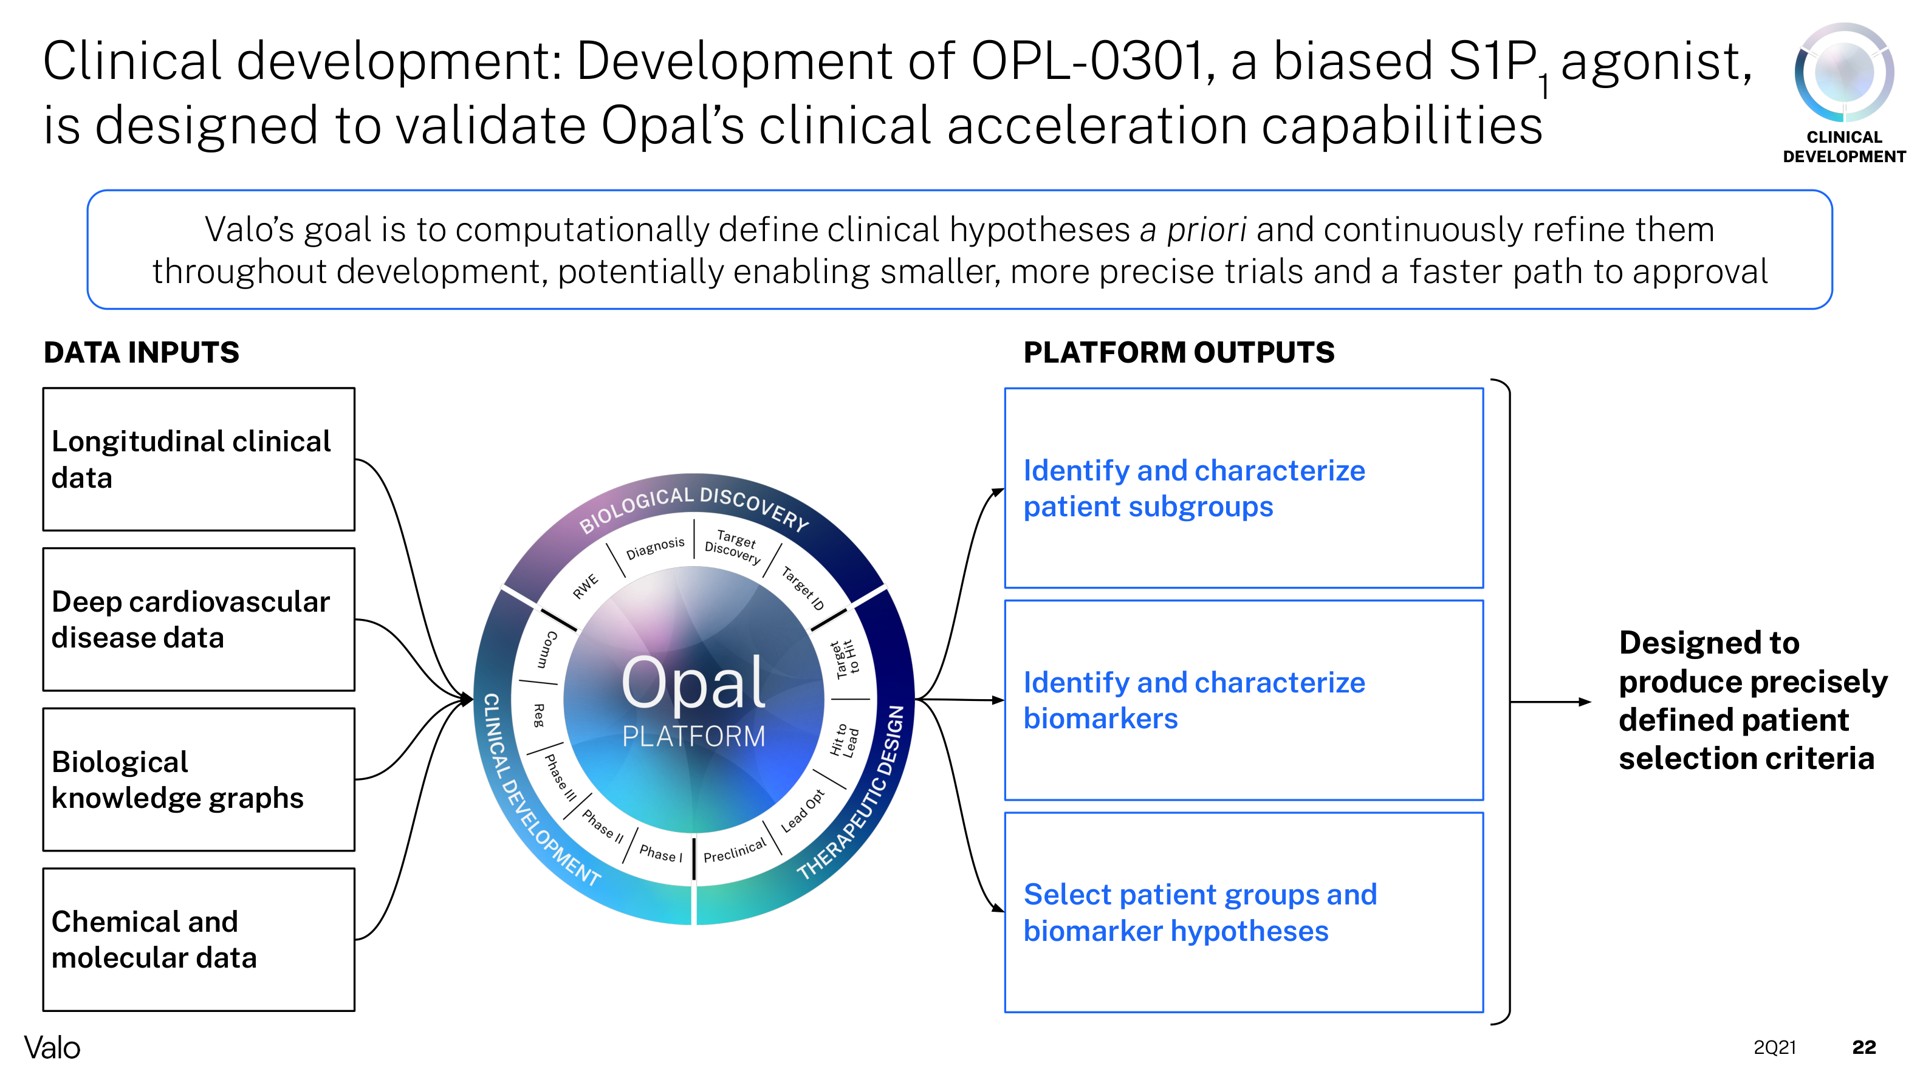 clinical development development of a biased agonist is designed to validate opal clinical acceleration capabilities creel | Valo